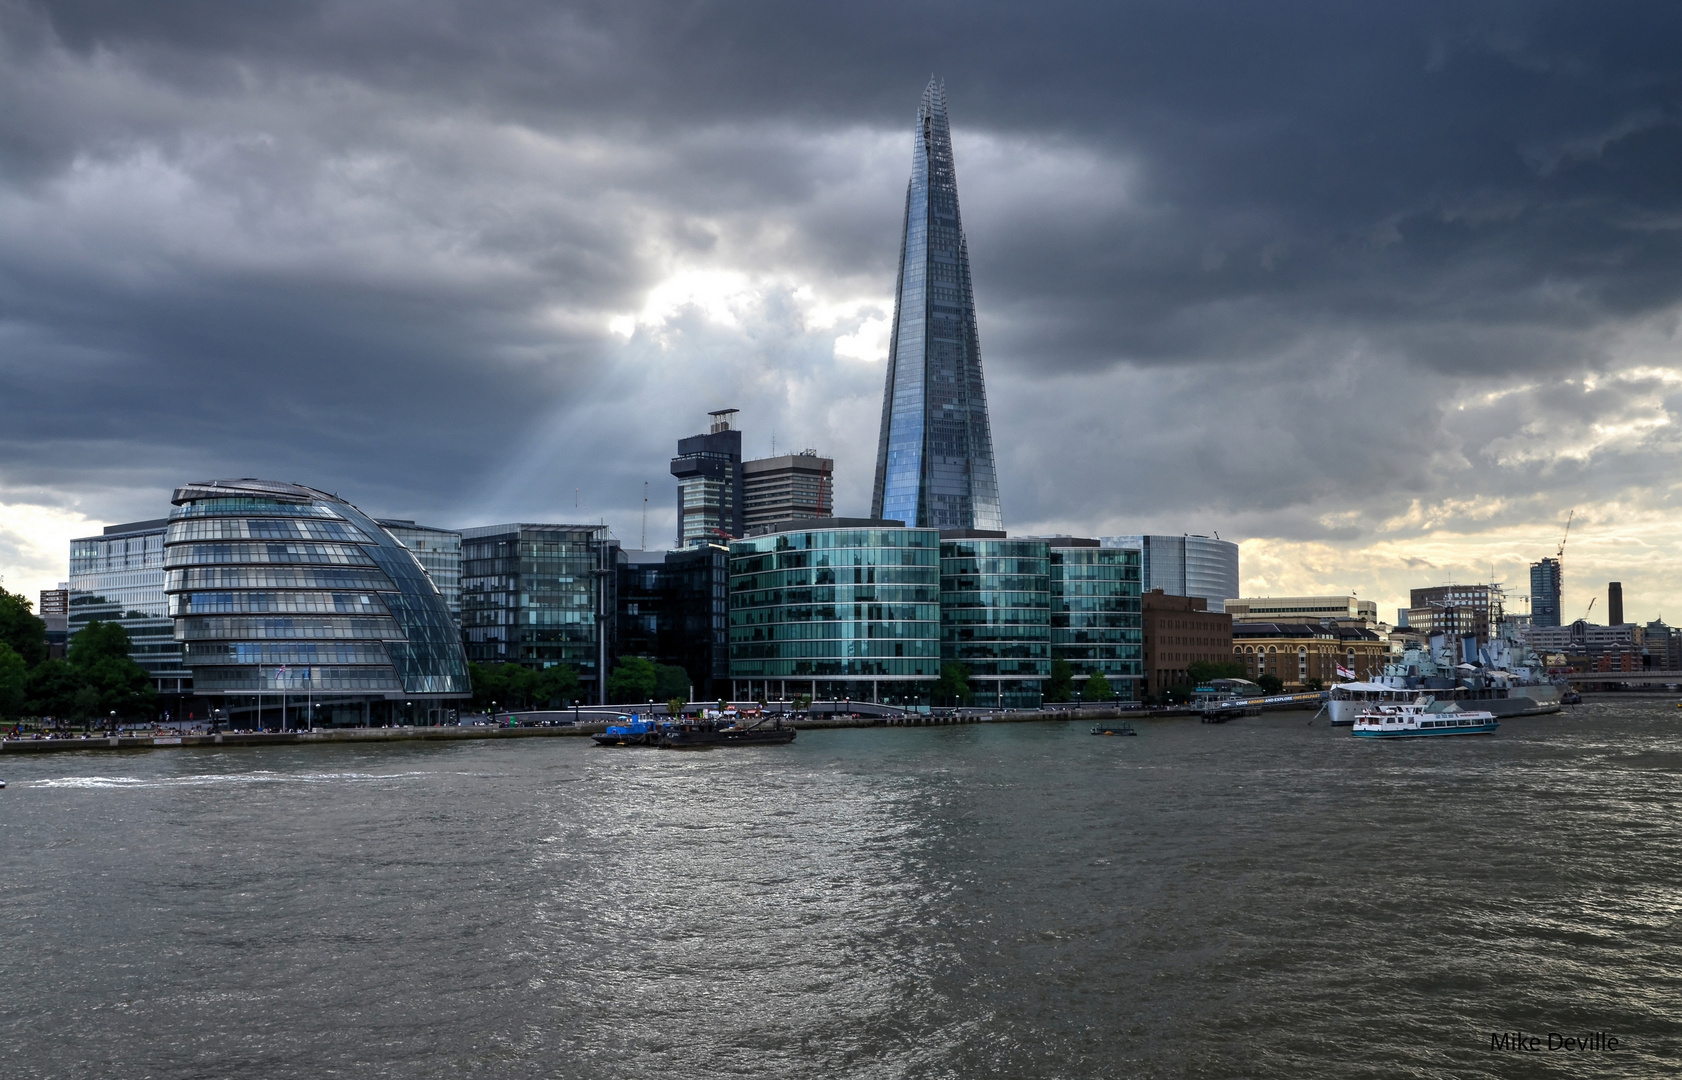 The Shard and the clouds